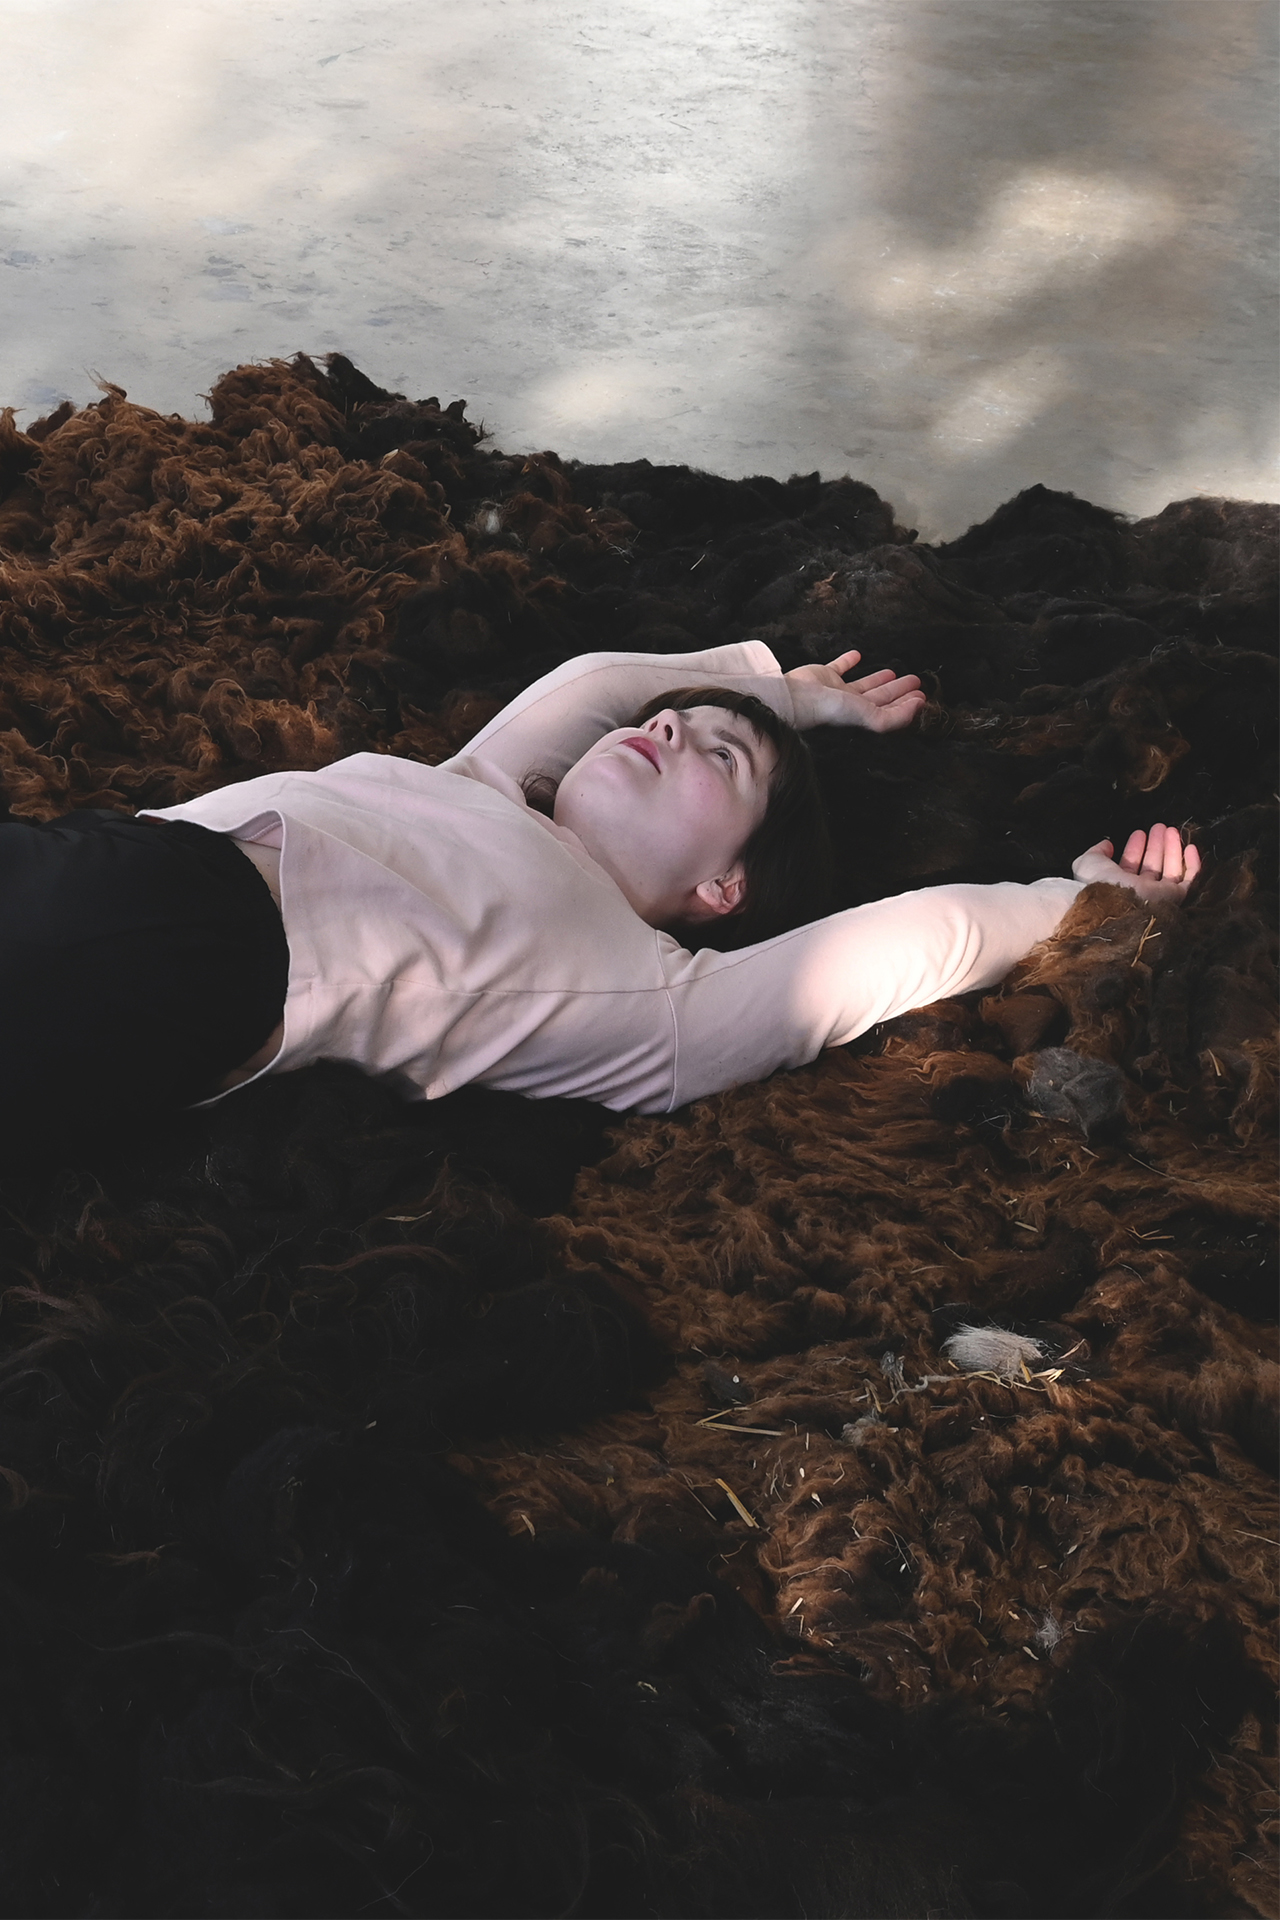 A large amount of brown sheep wool is laid out on the floor. A young woman is lying on the wool, with her arms stretched above her head. The woman is wearing a light pink shirt and black trousers.